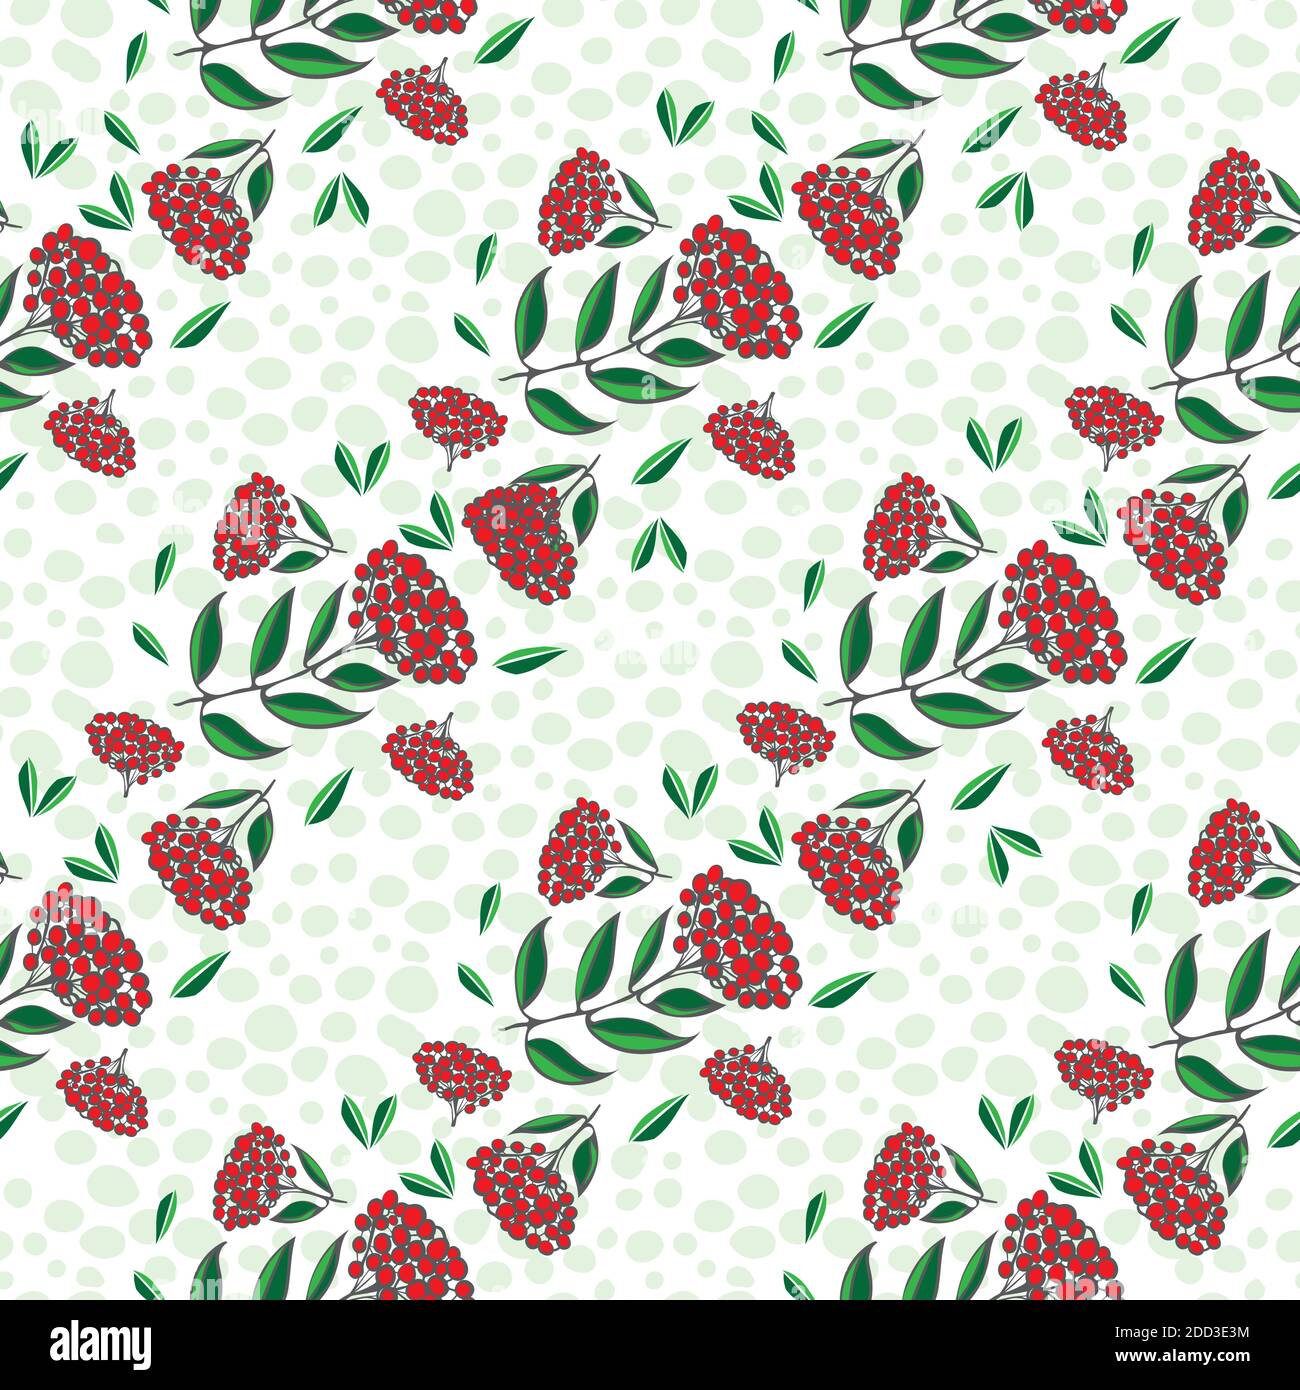 Vector garlands of cotoneaster berries and leaves. Seamless red, white, green pattern background. Backdrop with diagonal rows of hand drawn fruit and Stock Vector